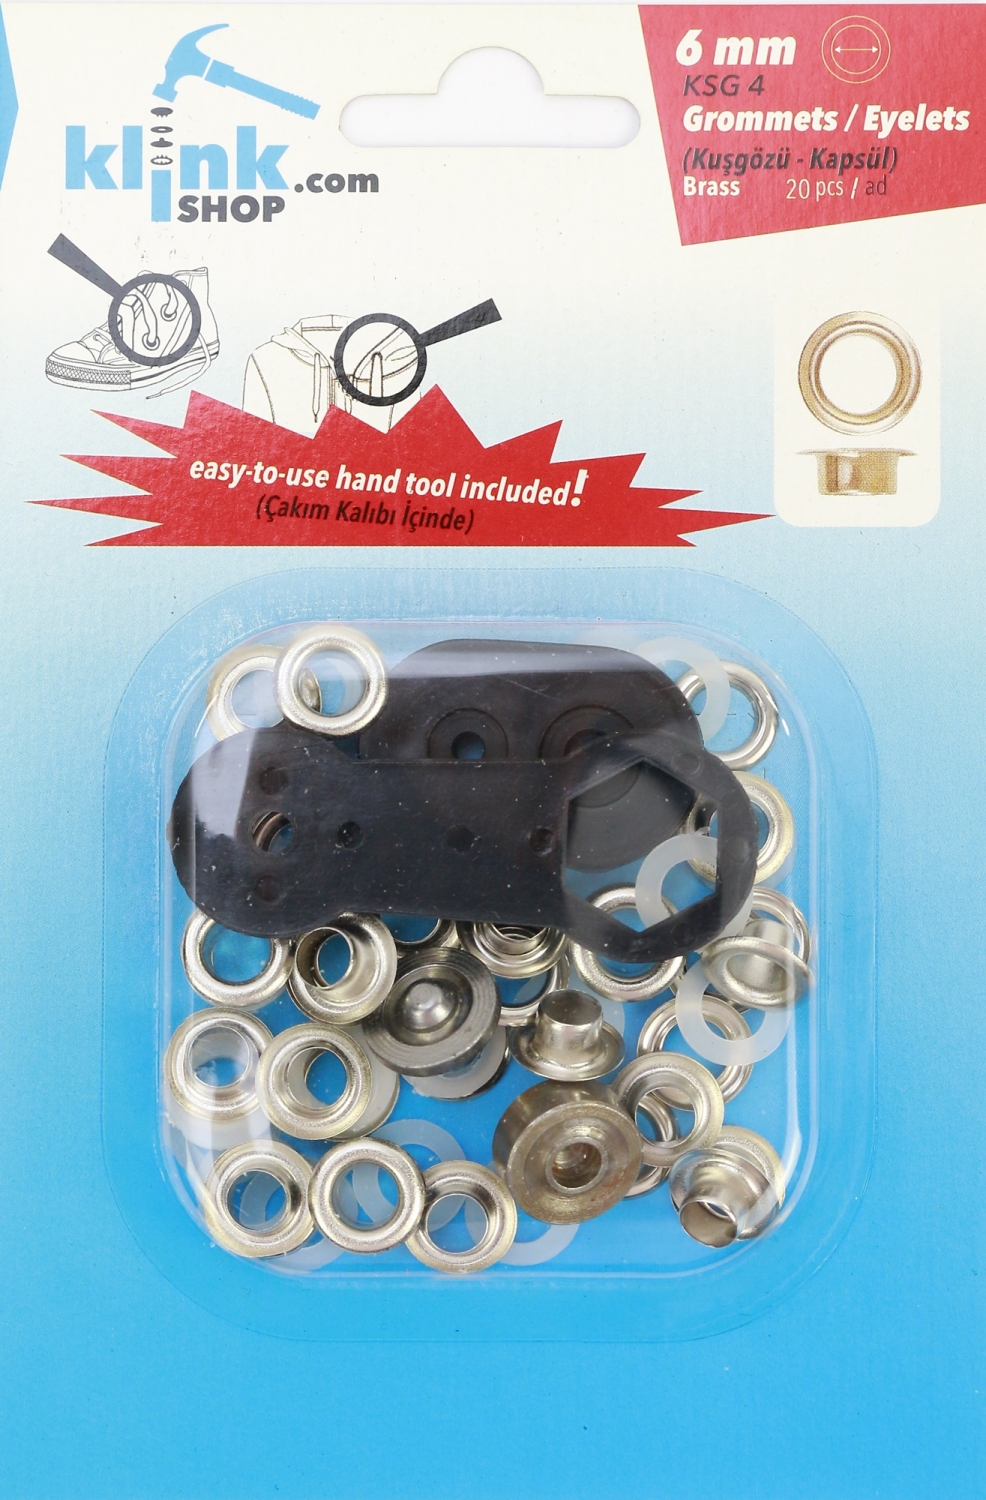 6 mm Eyelets and Grommets Easy Application Kit (20 pcs/pack)